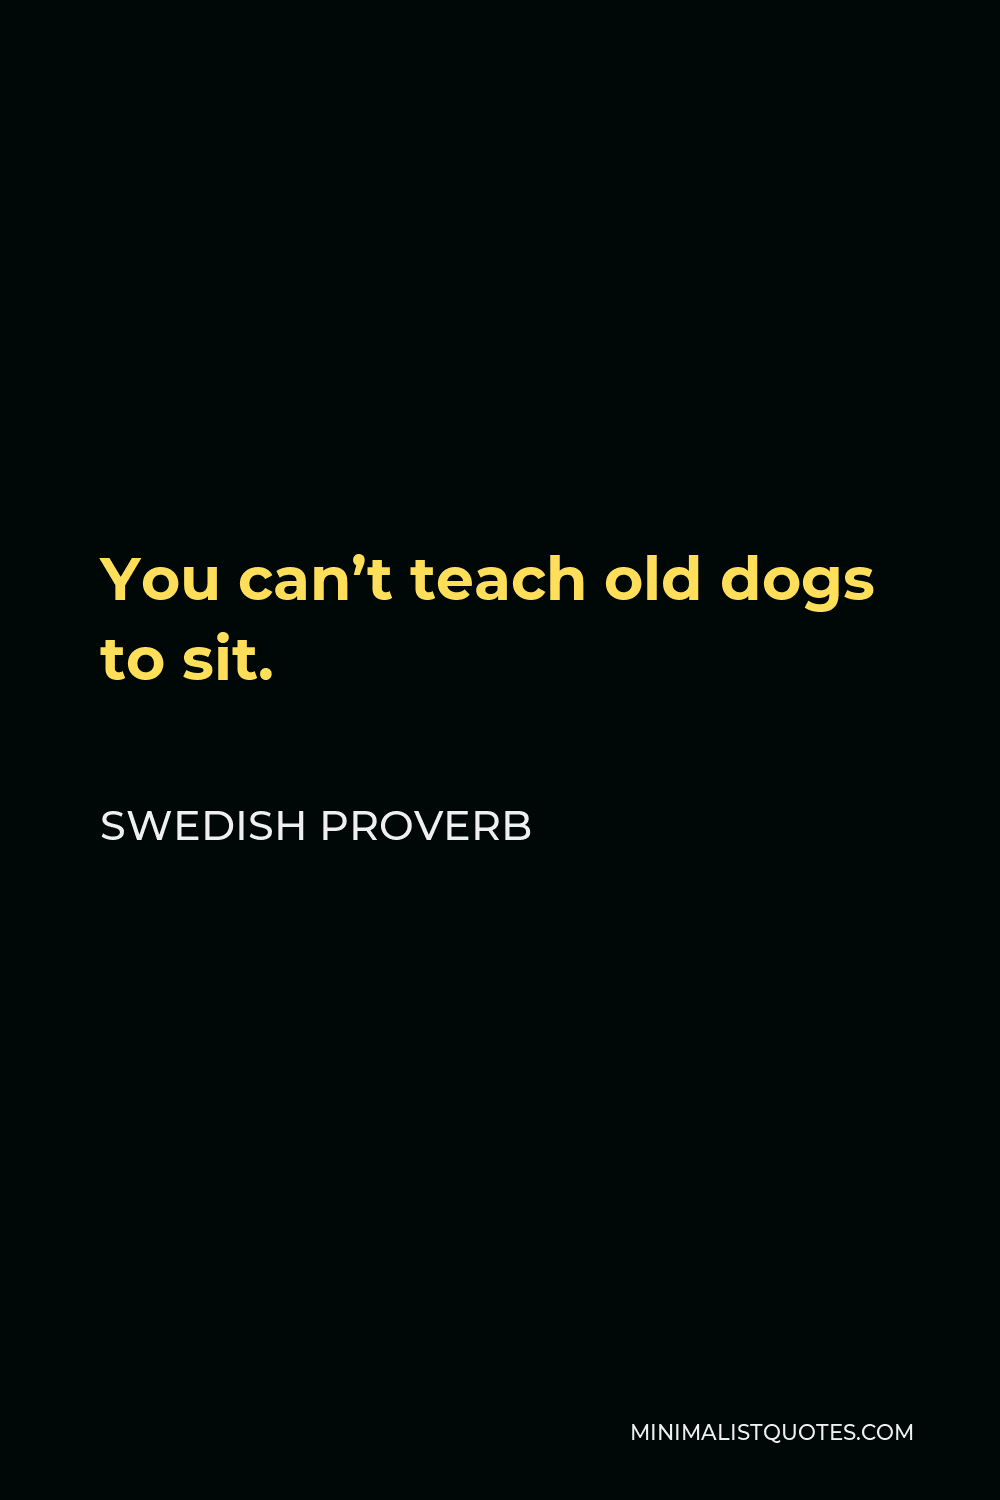 Swedish Proverb Quote - You can’t teach old dogs to sit.